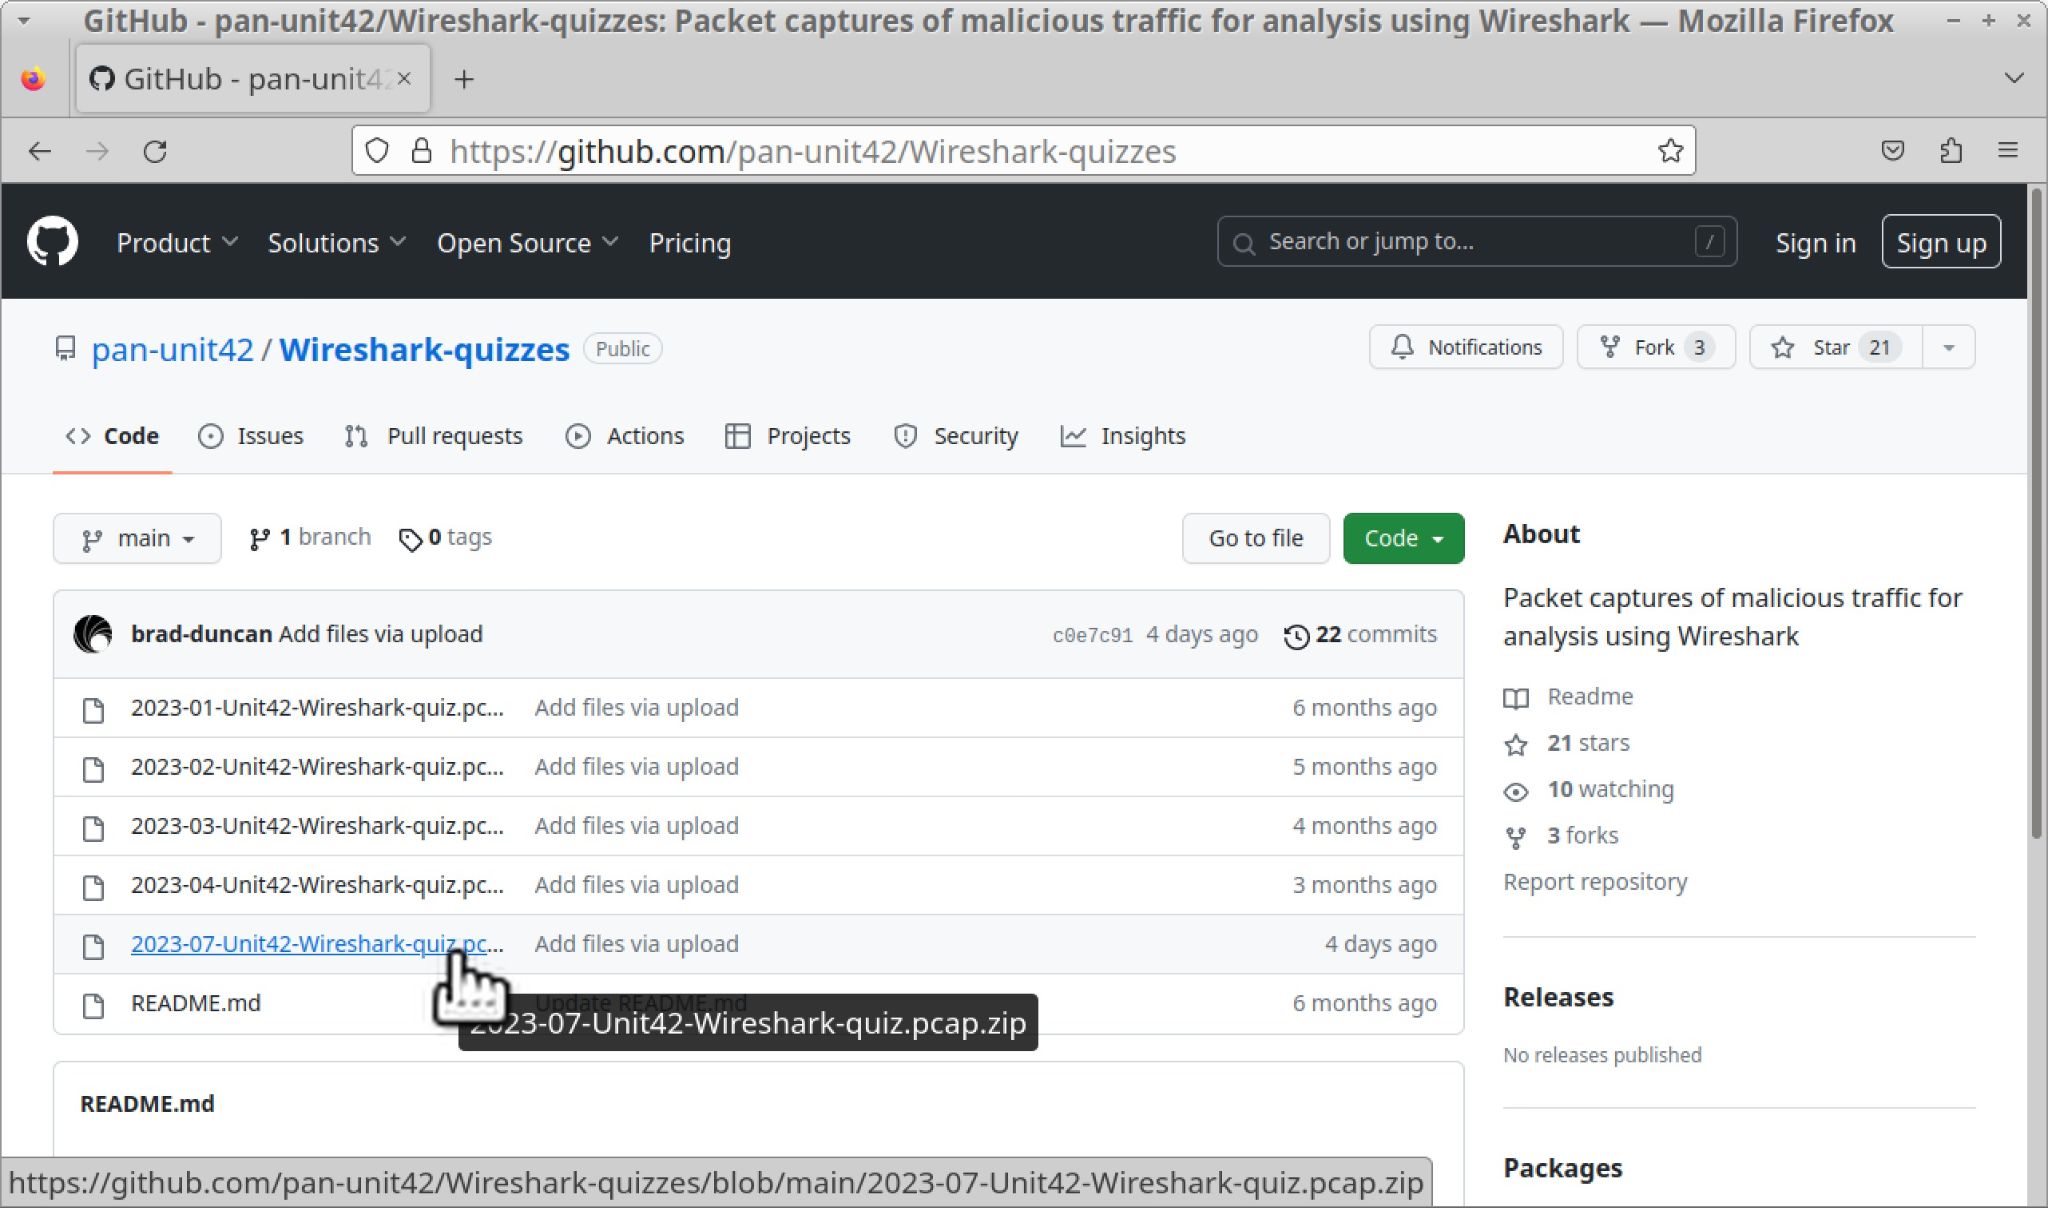 Image 1 is a screenshot of the GitHub repository for the Unit 42 Wireshark quizzes. 